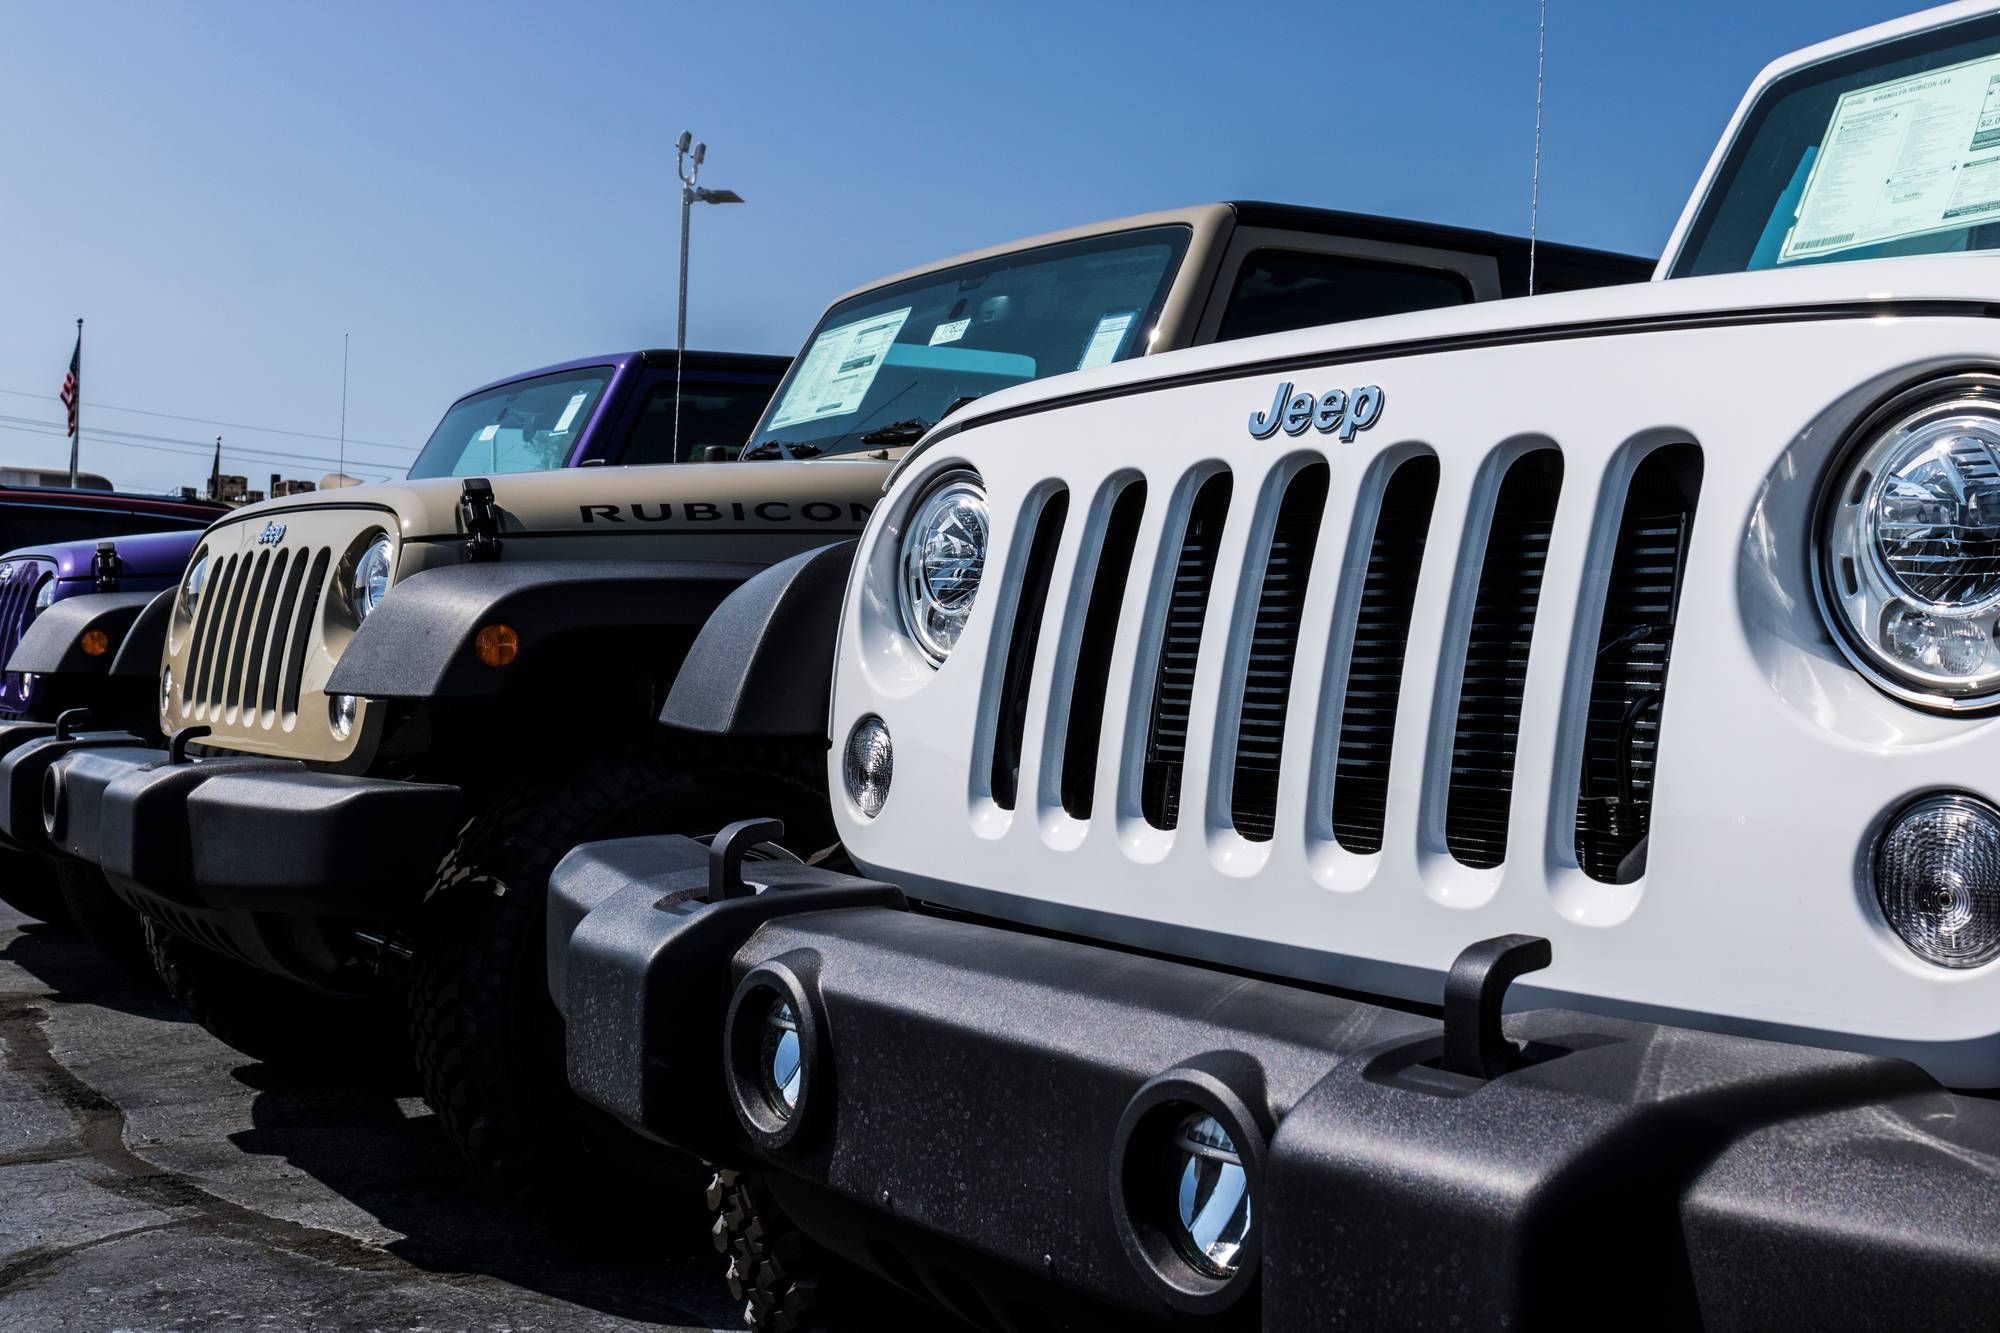 Fiat Chrysler vehicles are allegedly equipped with defective engines.